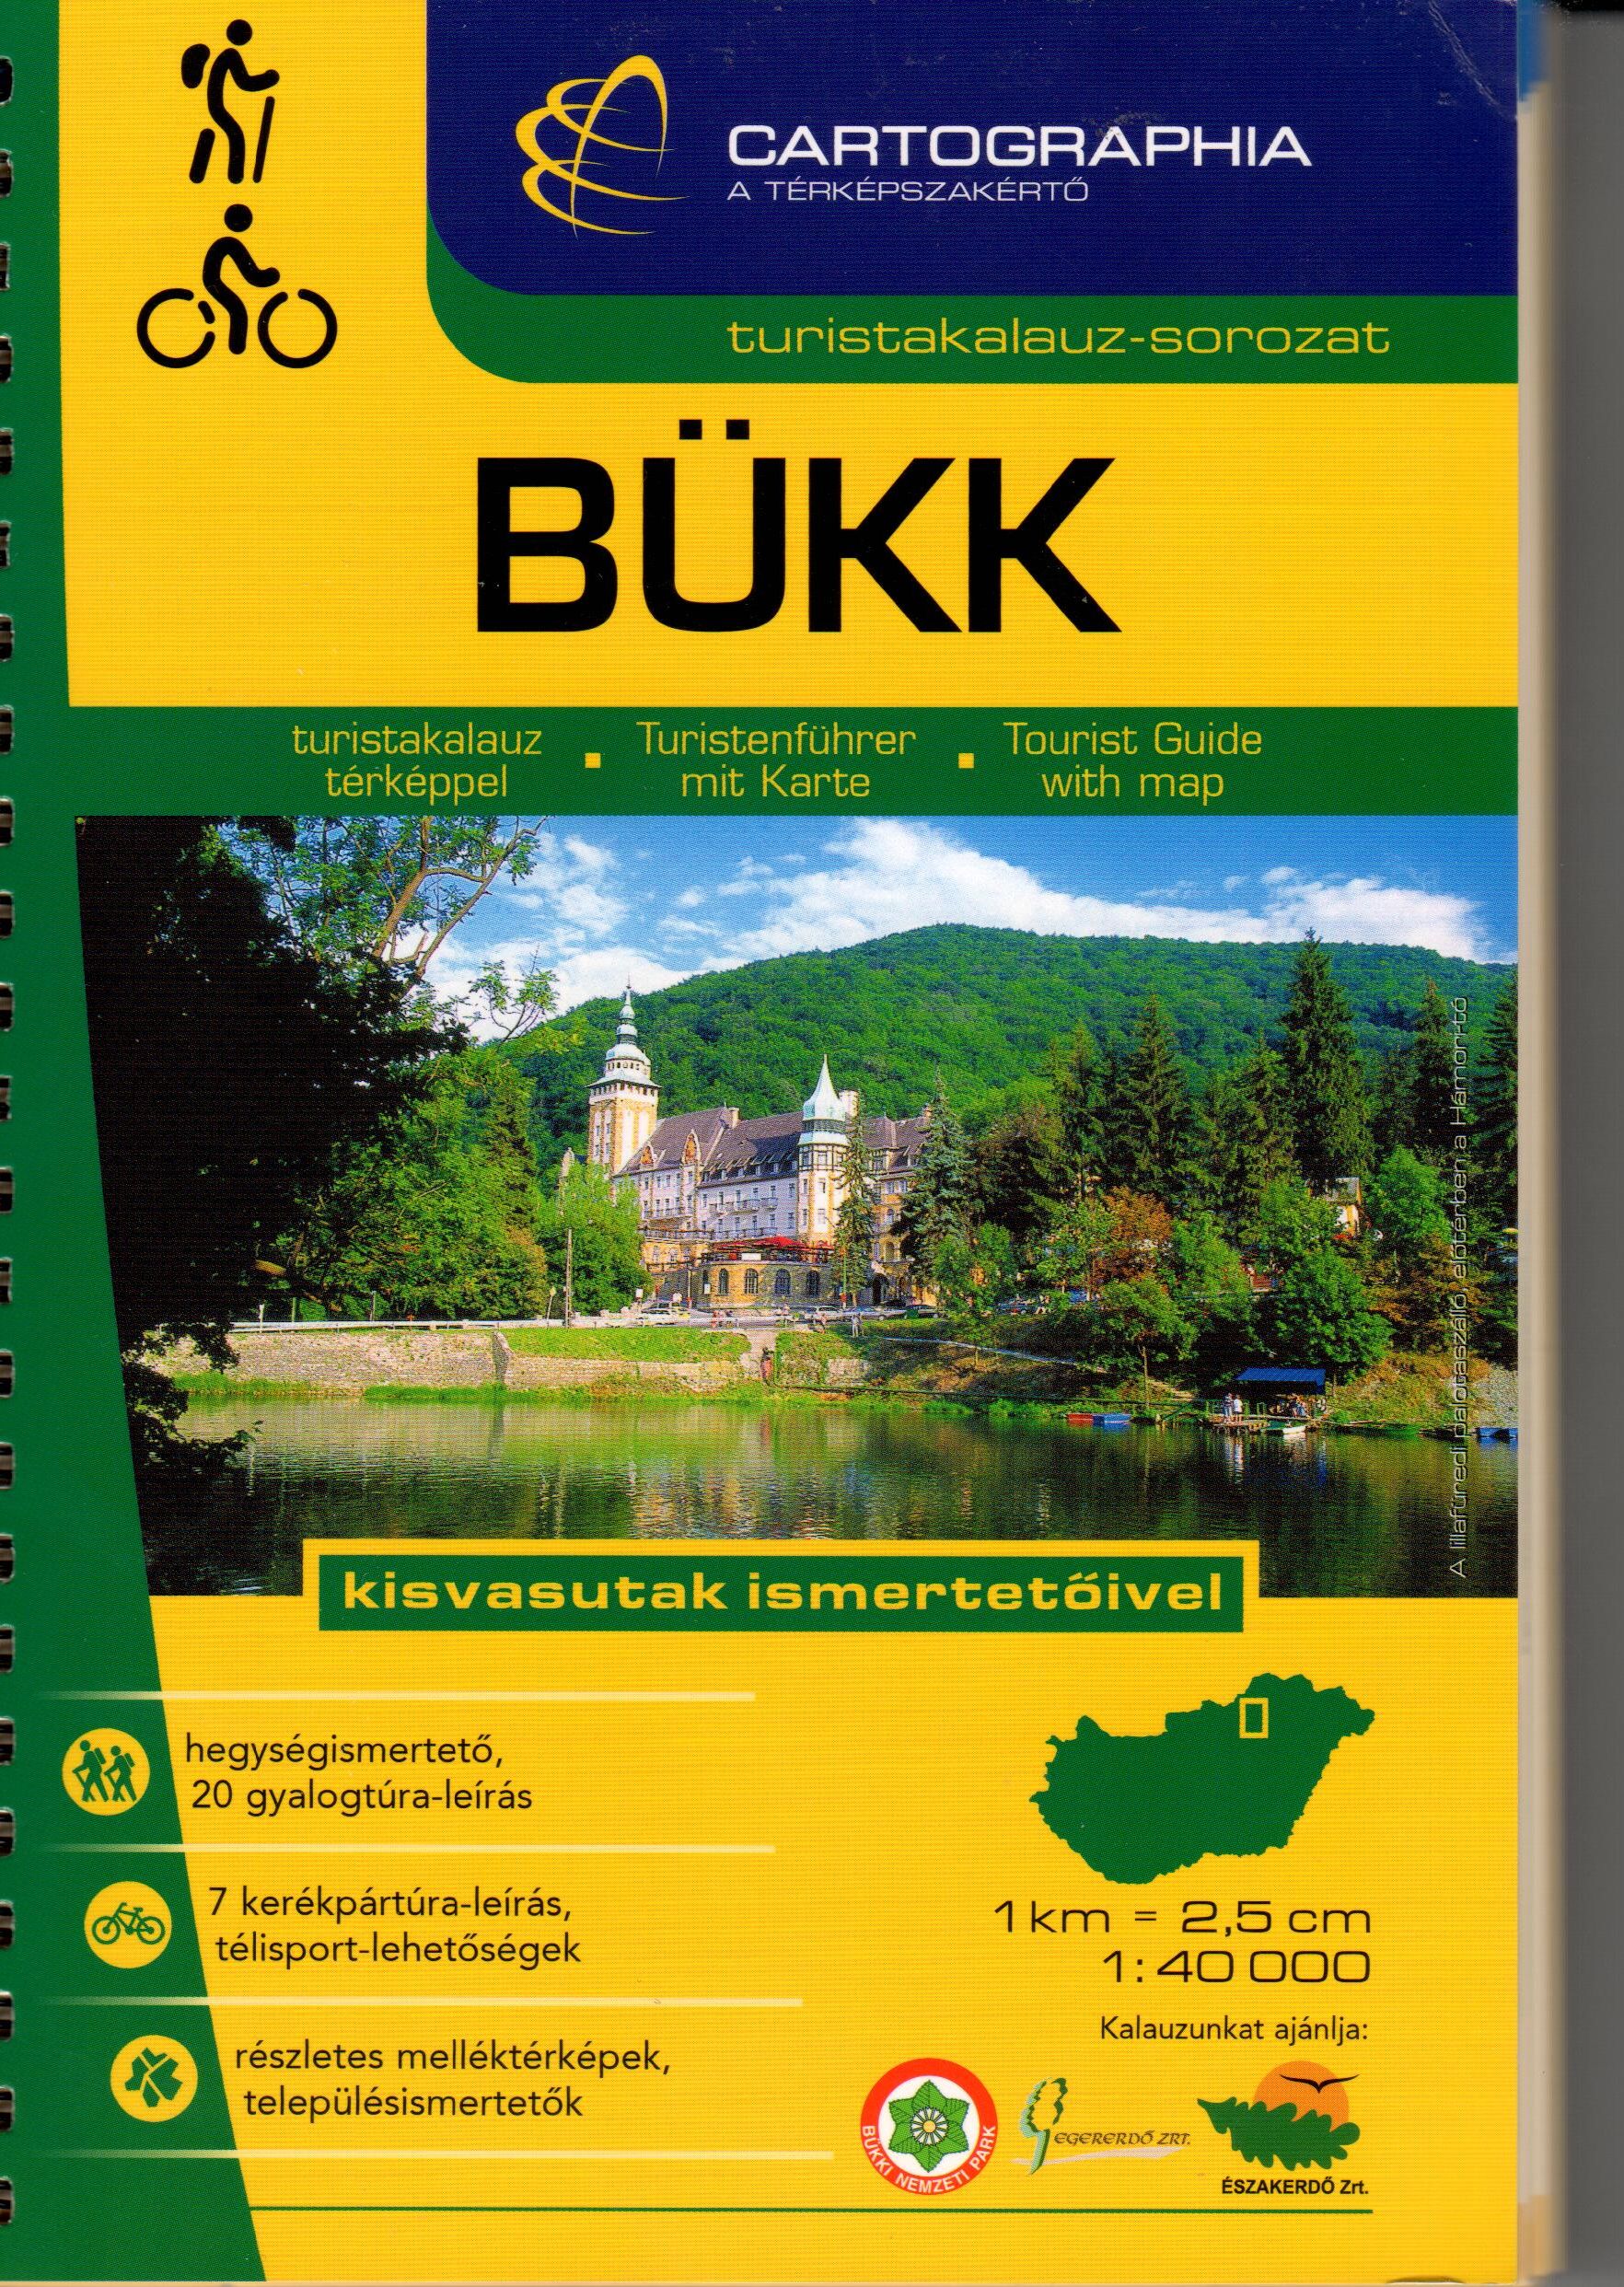 Detailed tourist info in Hungarian